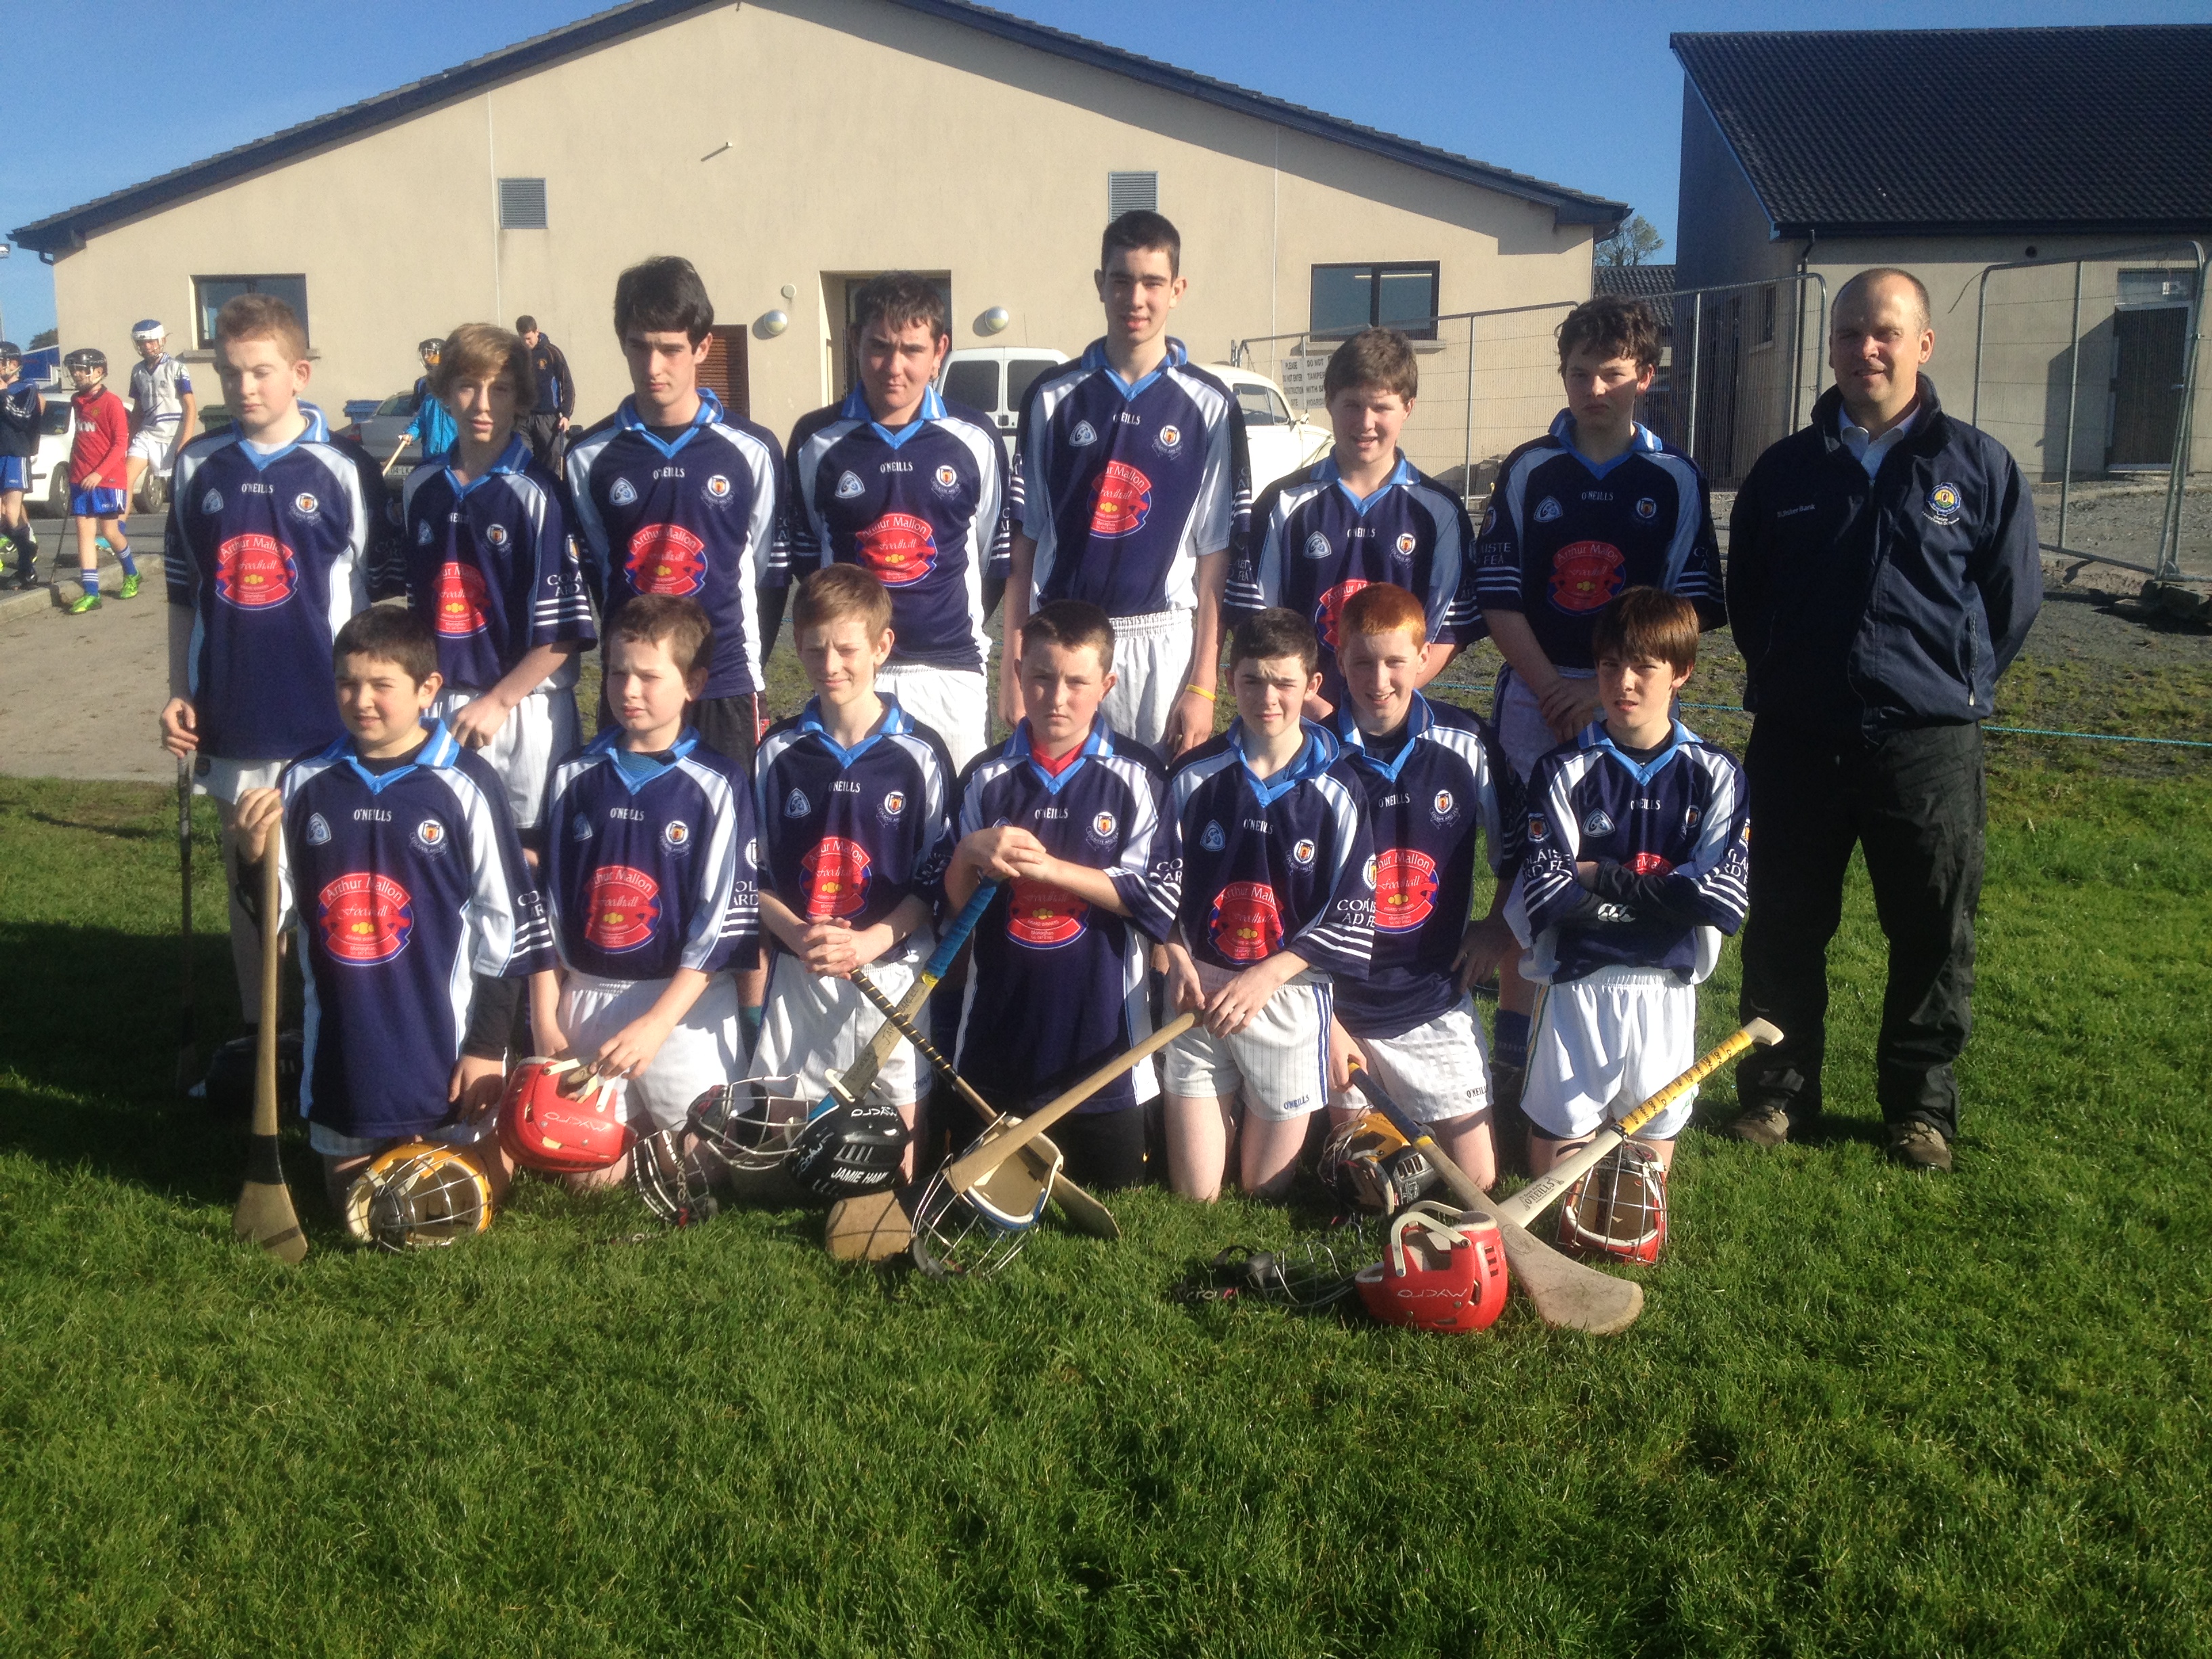 Secondary Schools Hurling Coaching/Blitz day in Cloghan on Friday 11th October